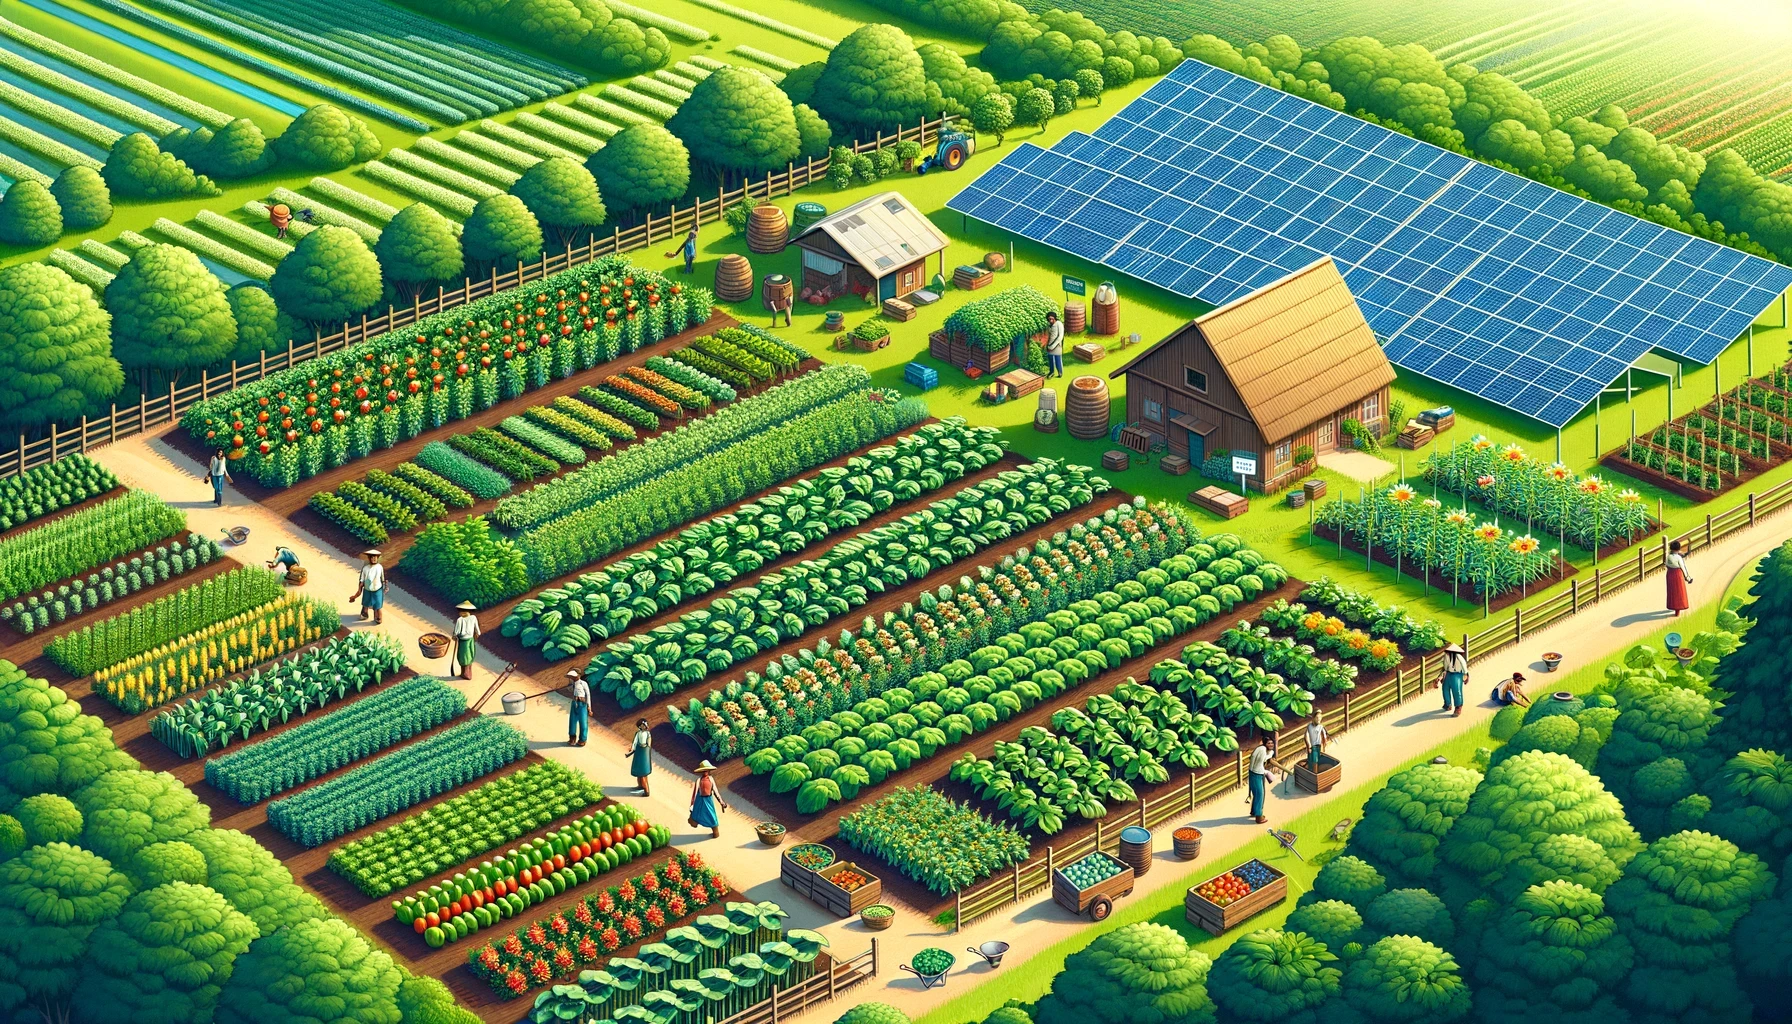 ush green farm with solar panels and diverse crops.